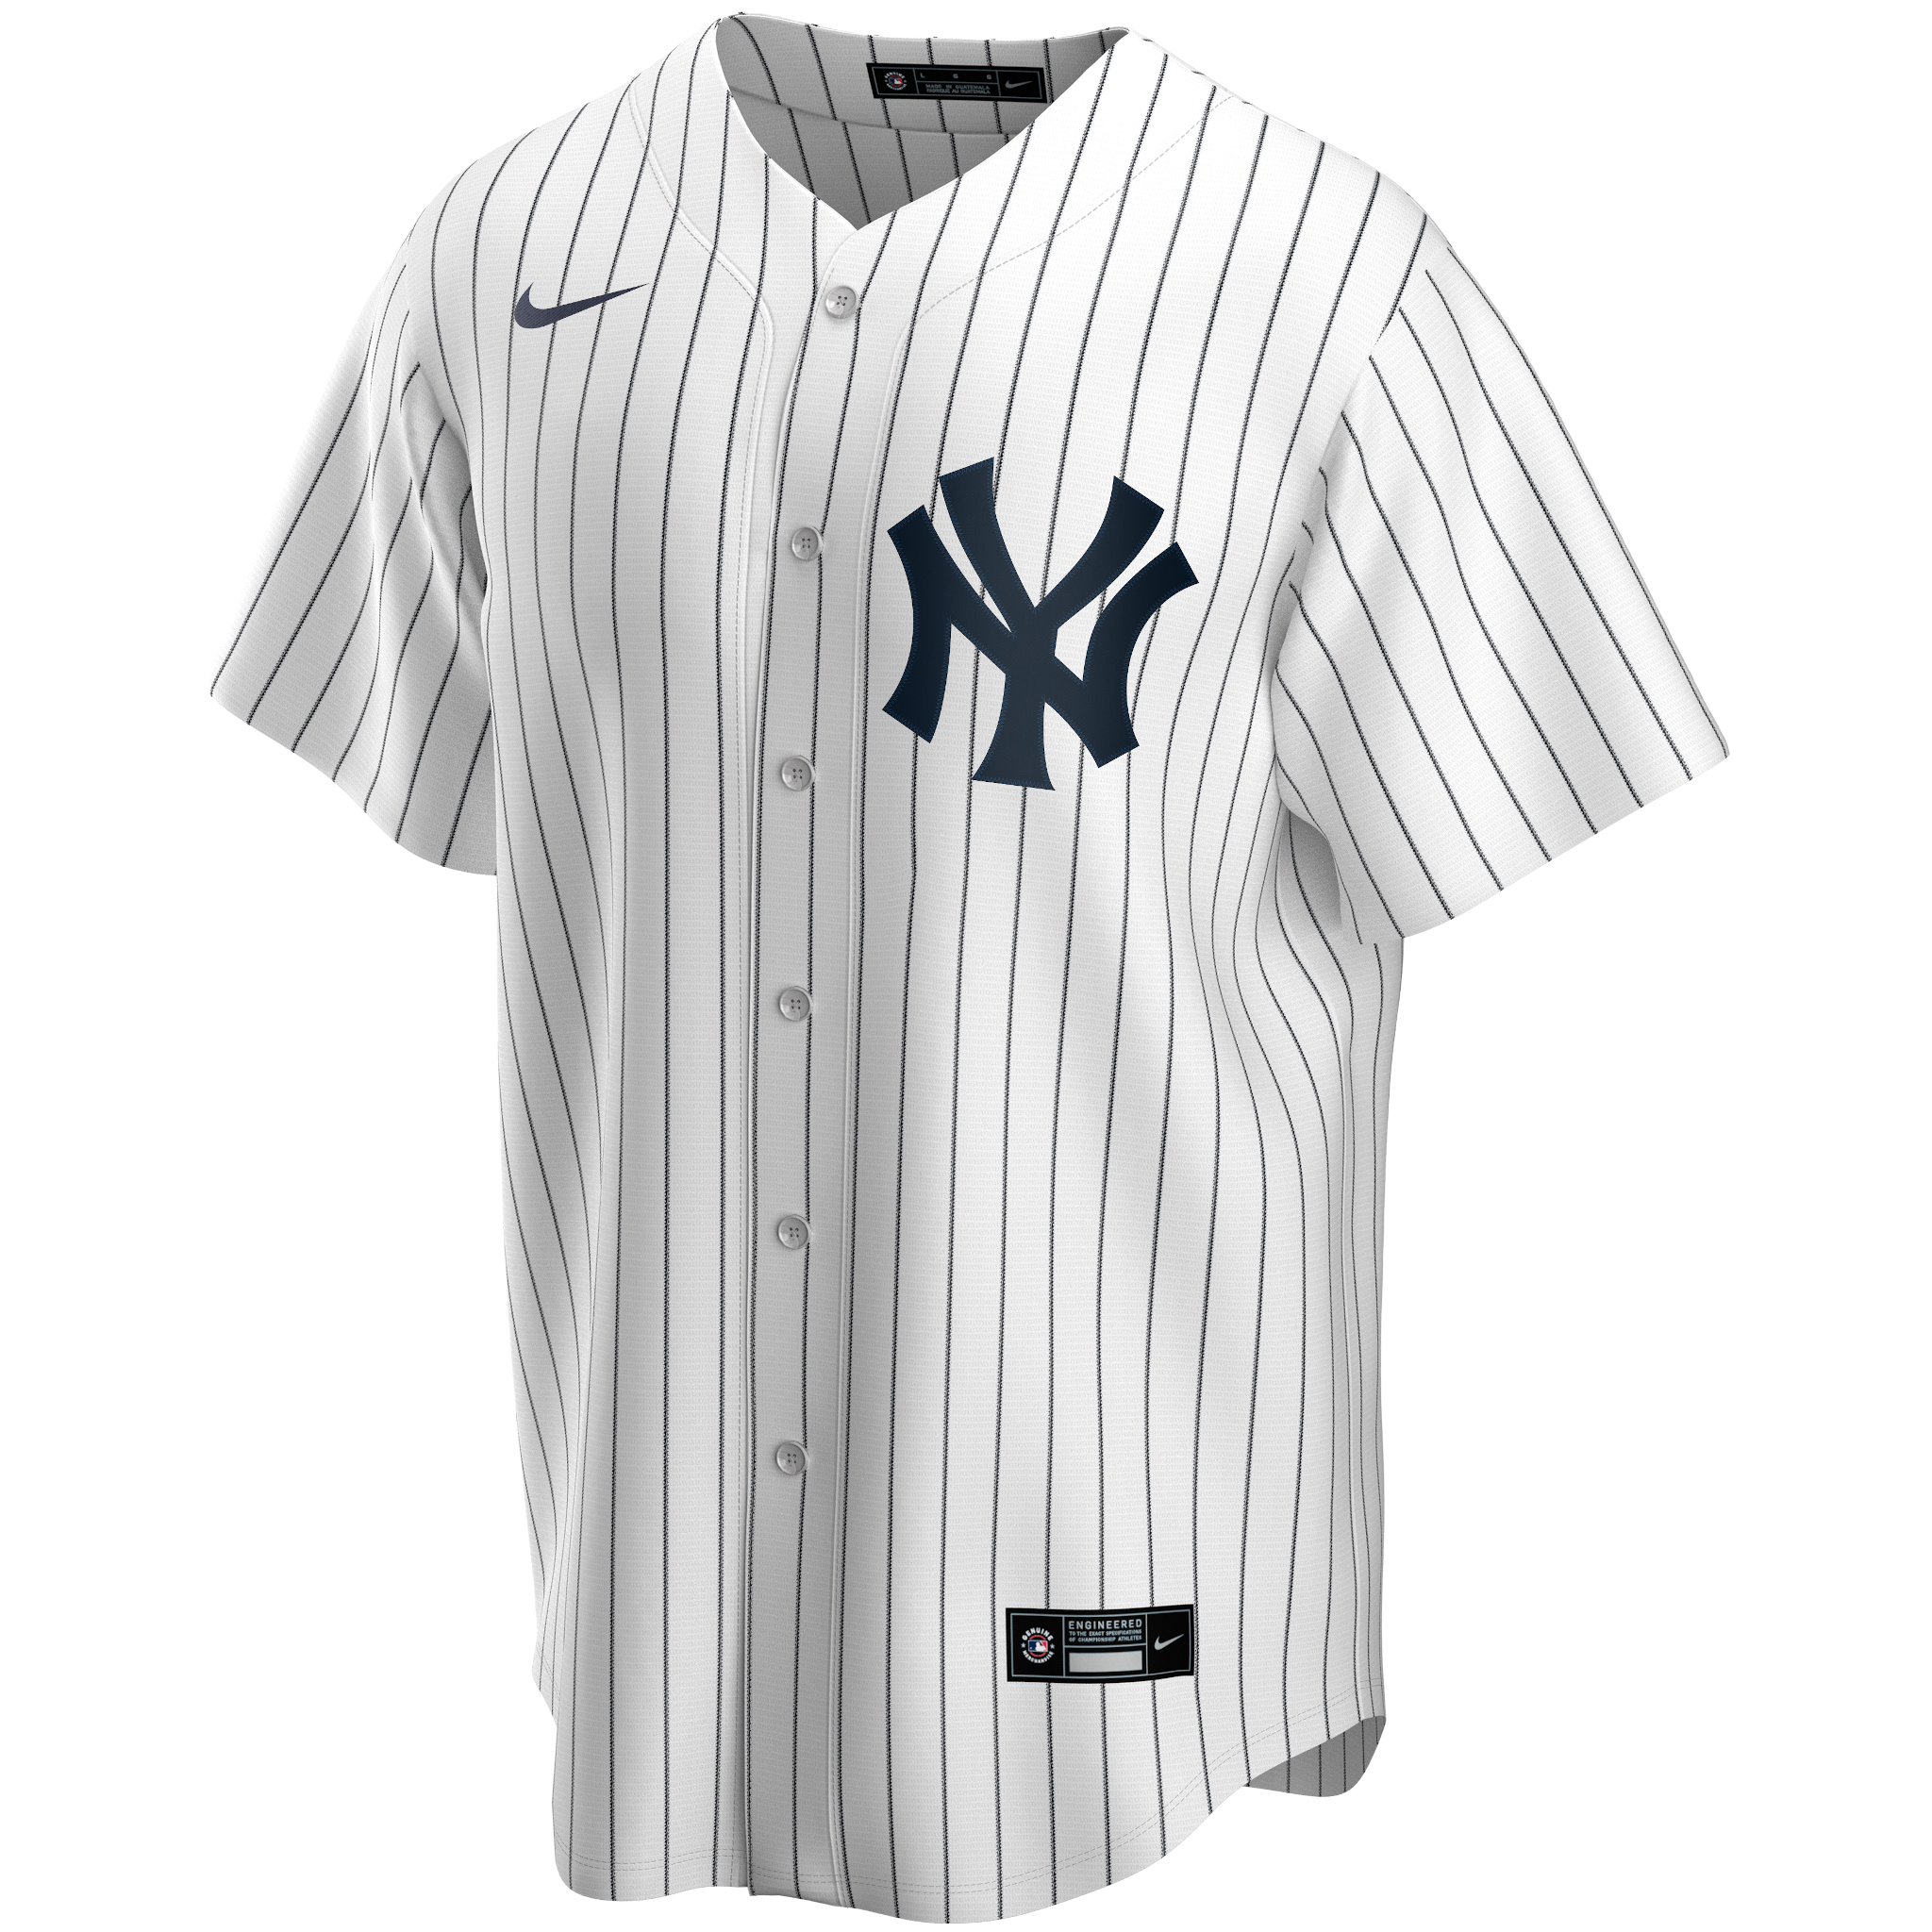 National Vintage League New York Yankees: Mark Teixeira 2009 White Pinstripe Majestic Stitched Jersey